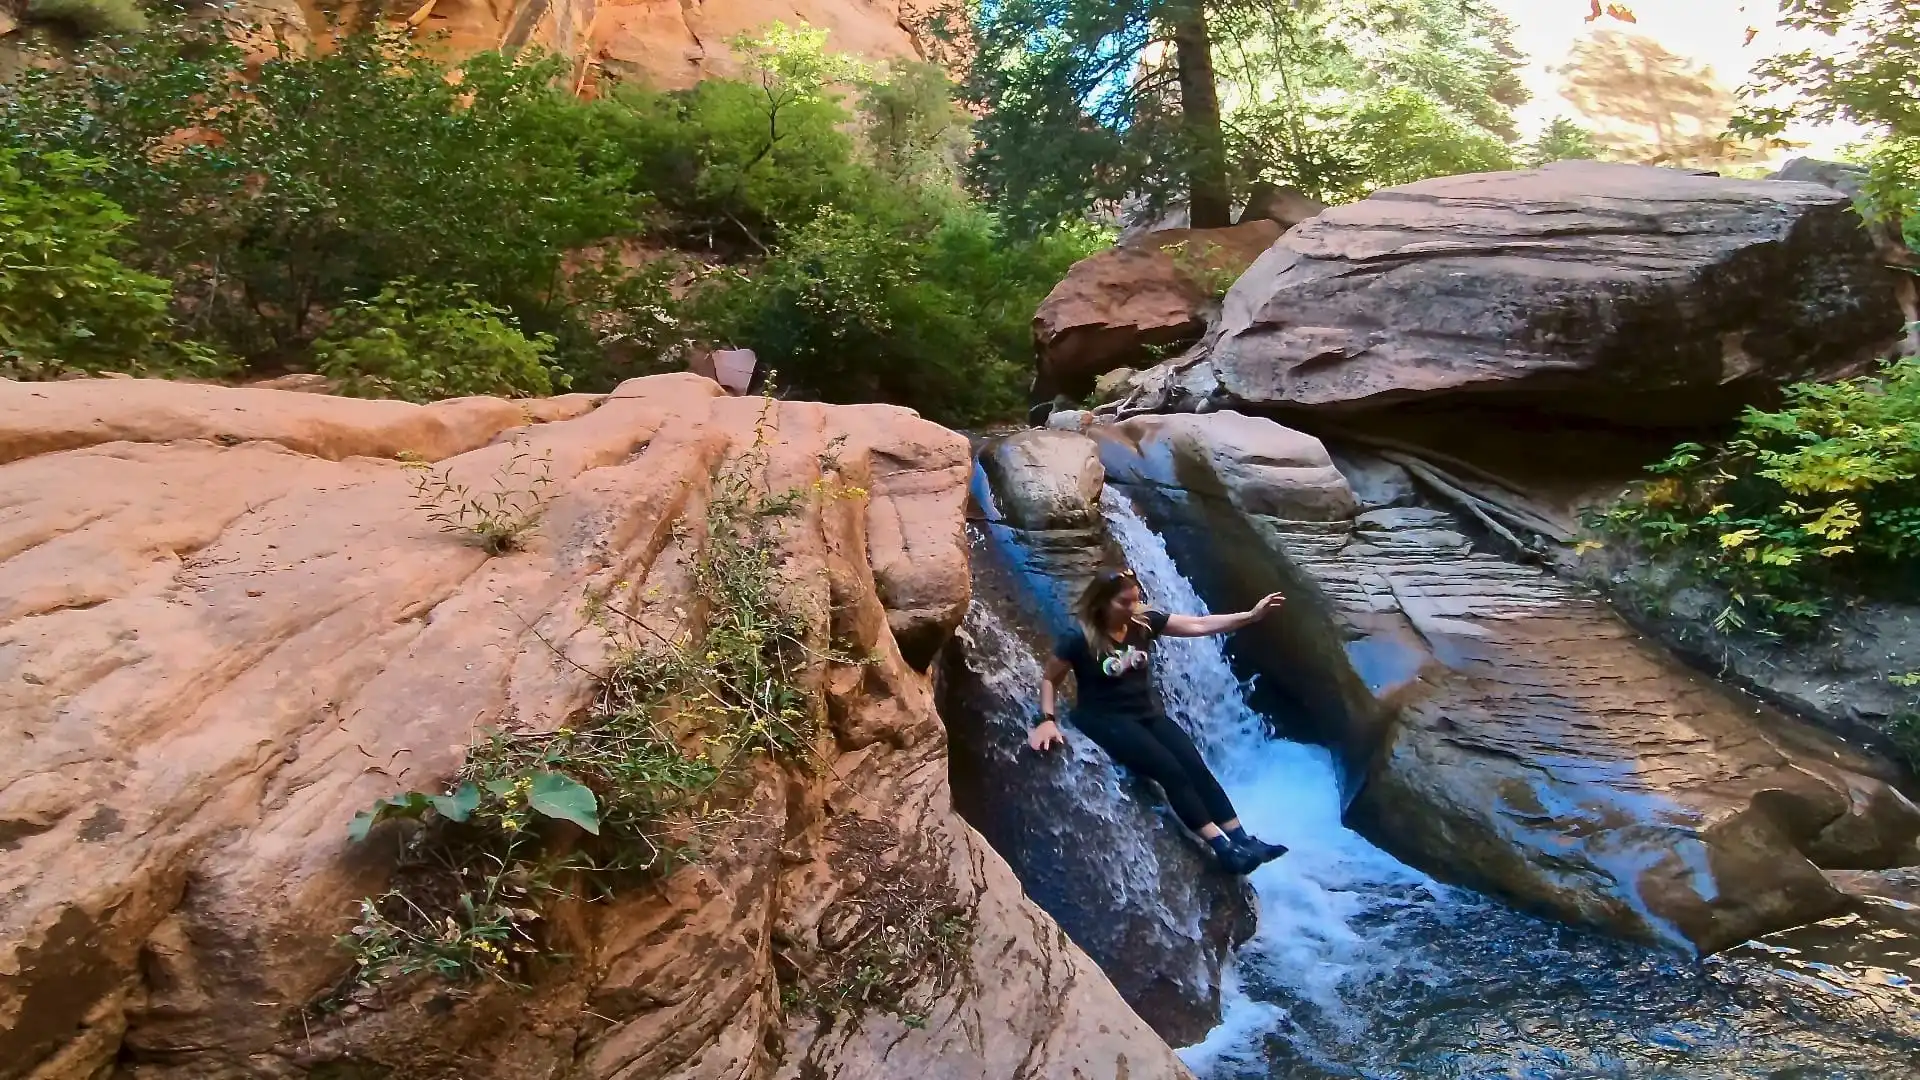 Lindsey is enjoying playing on the natural water slides in the canyon